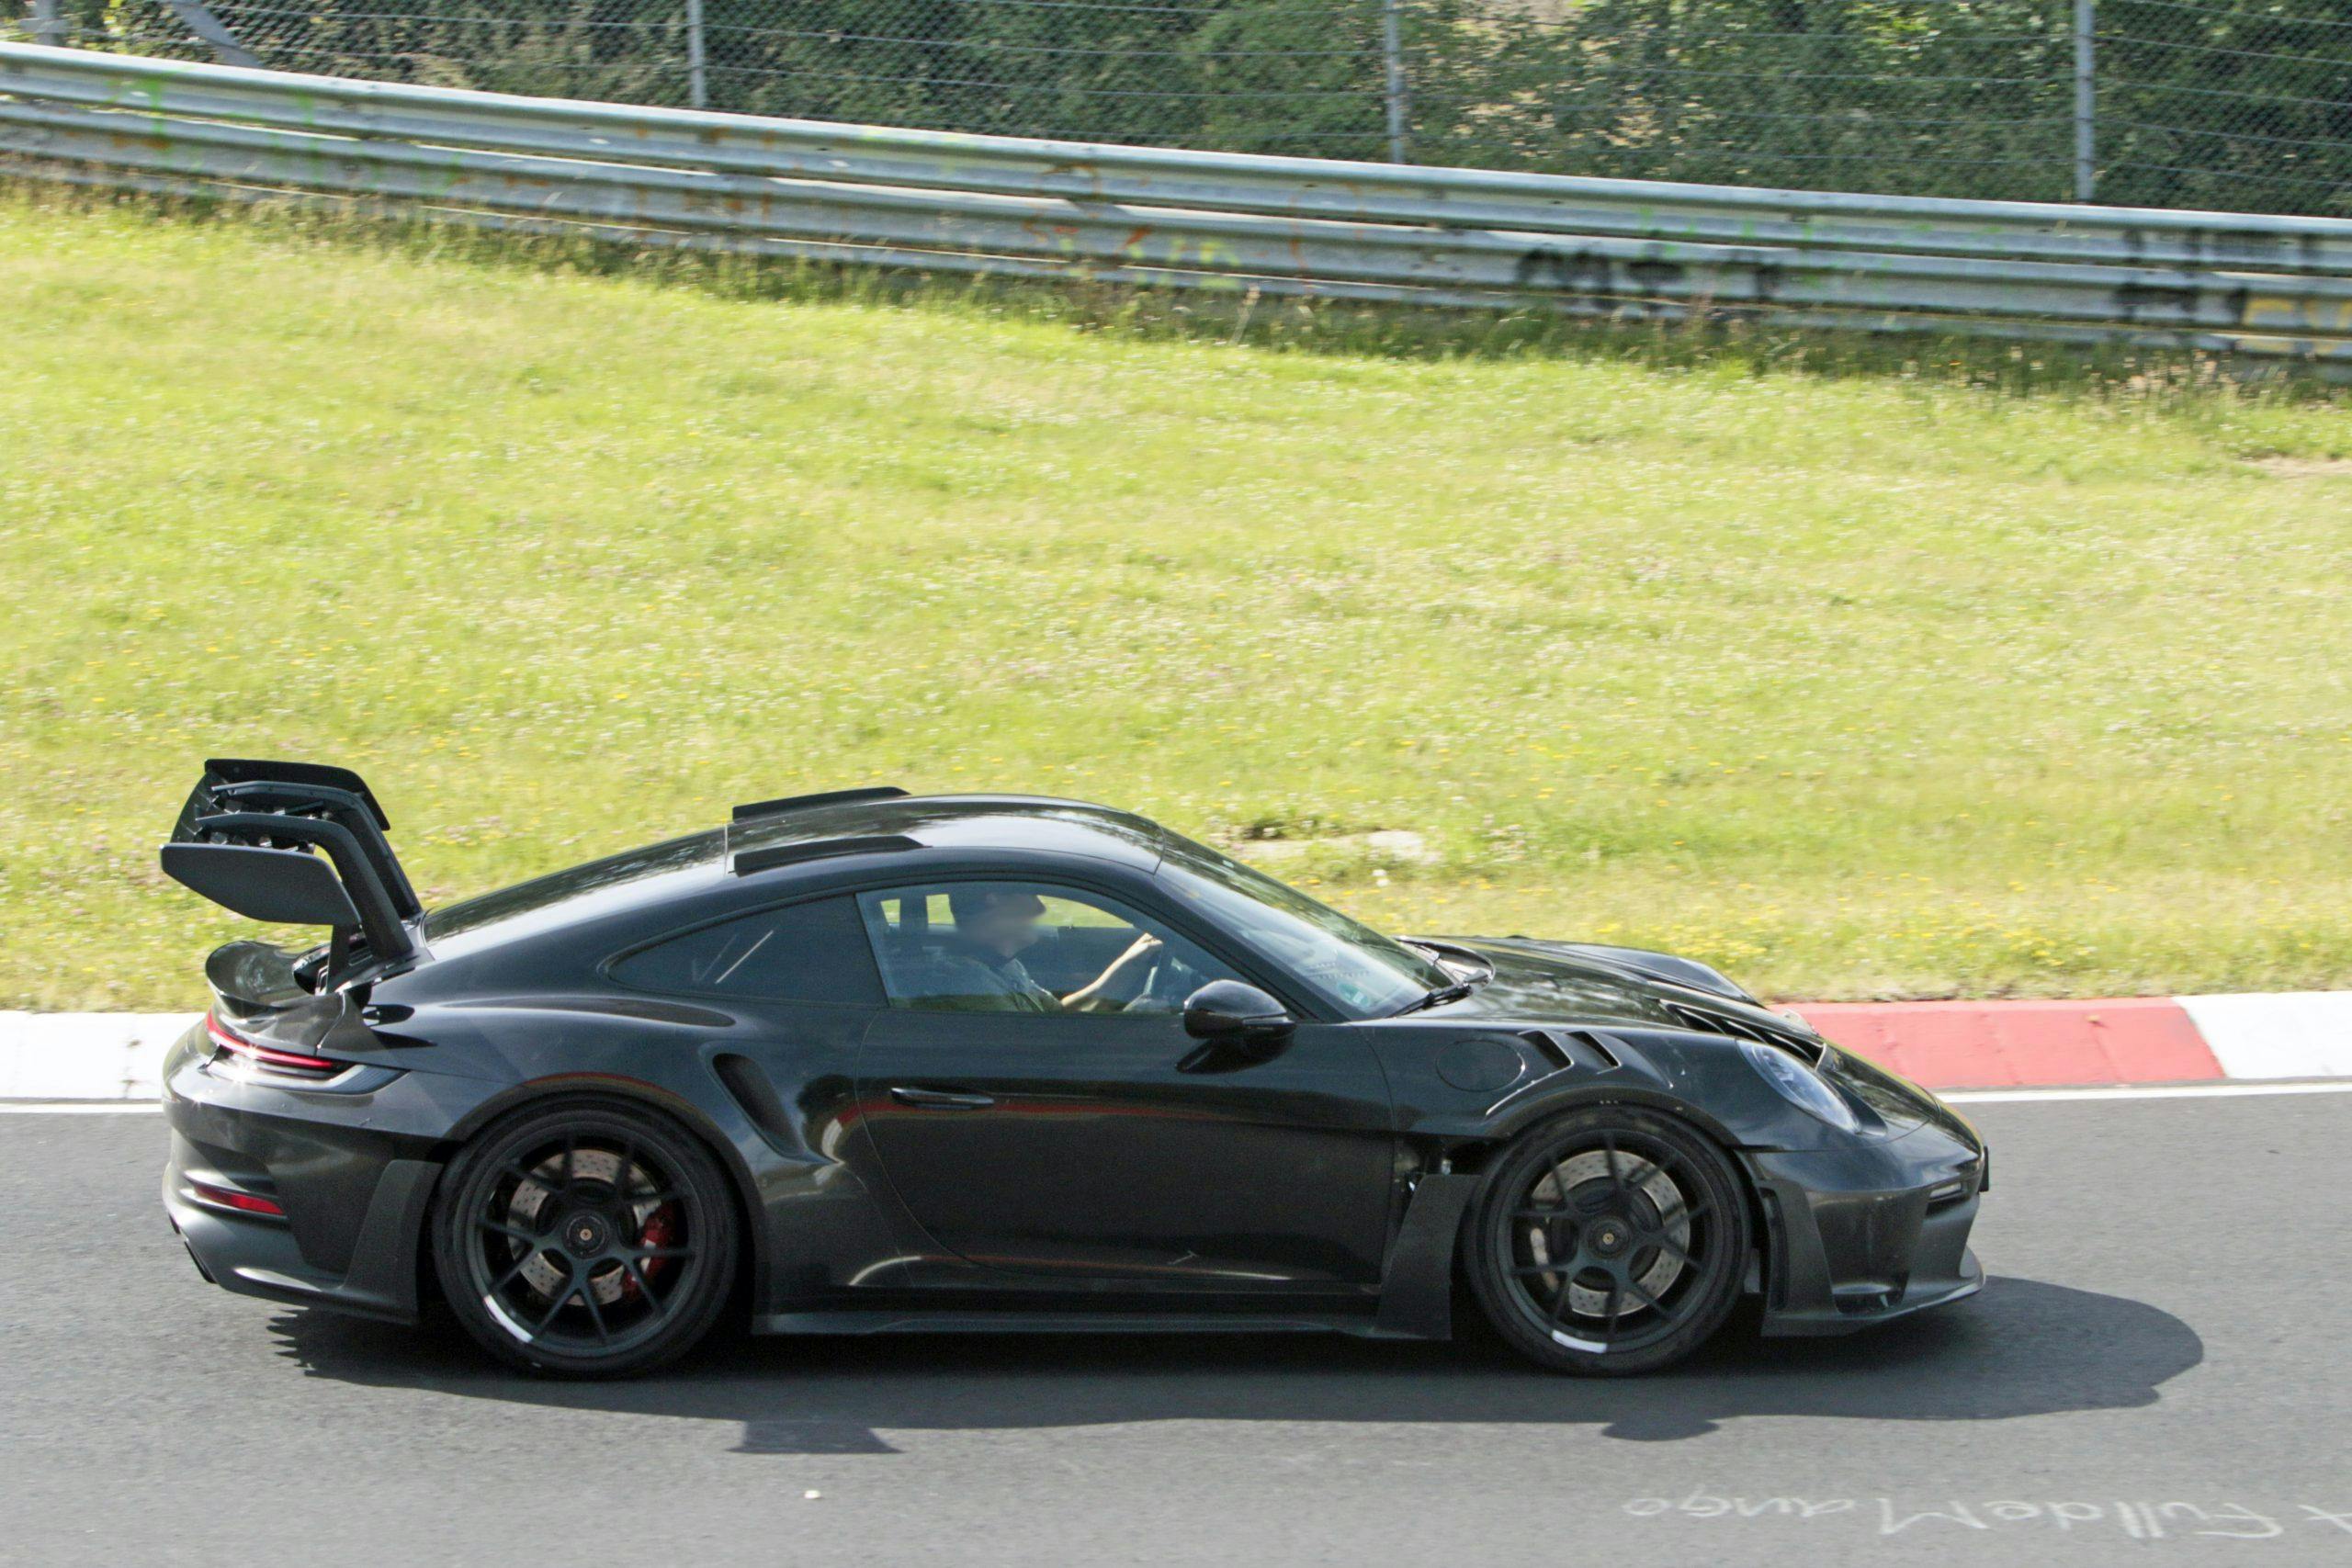 Porsche 911 GT3 RS Spy Shots exterior side profile and rear